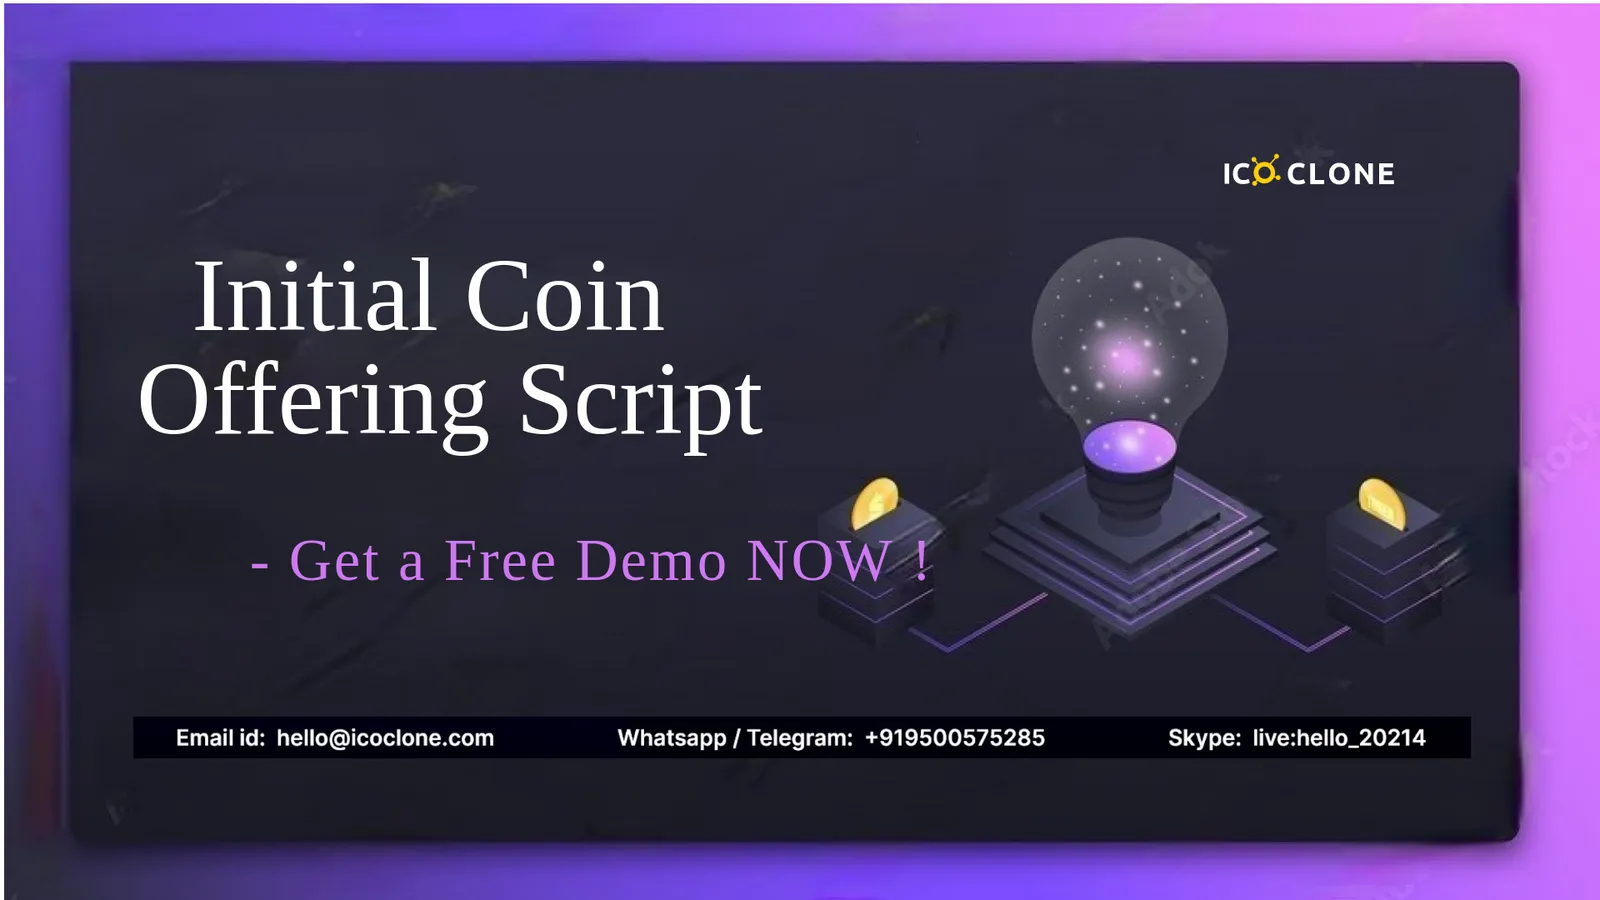 What is a Ready-made ICO Script? 